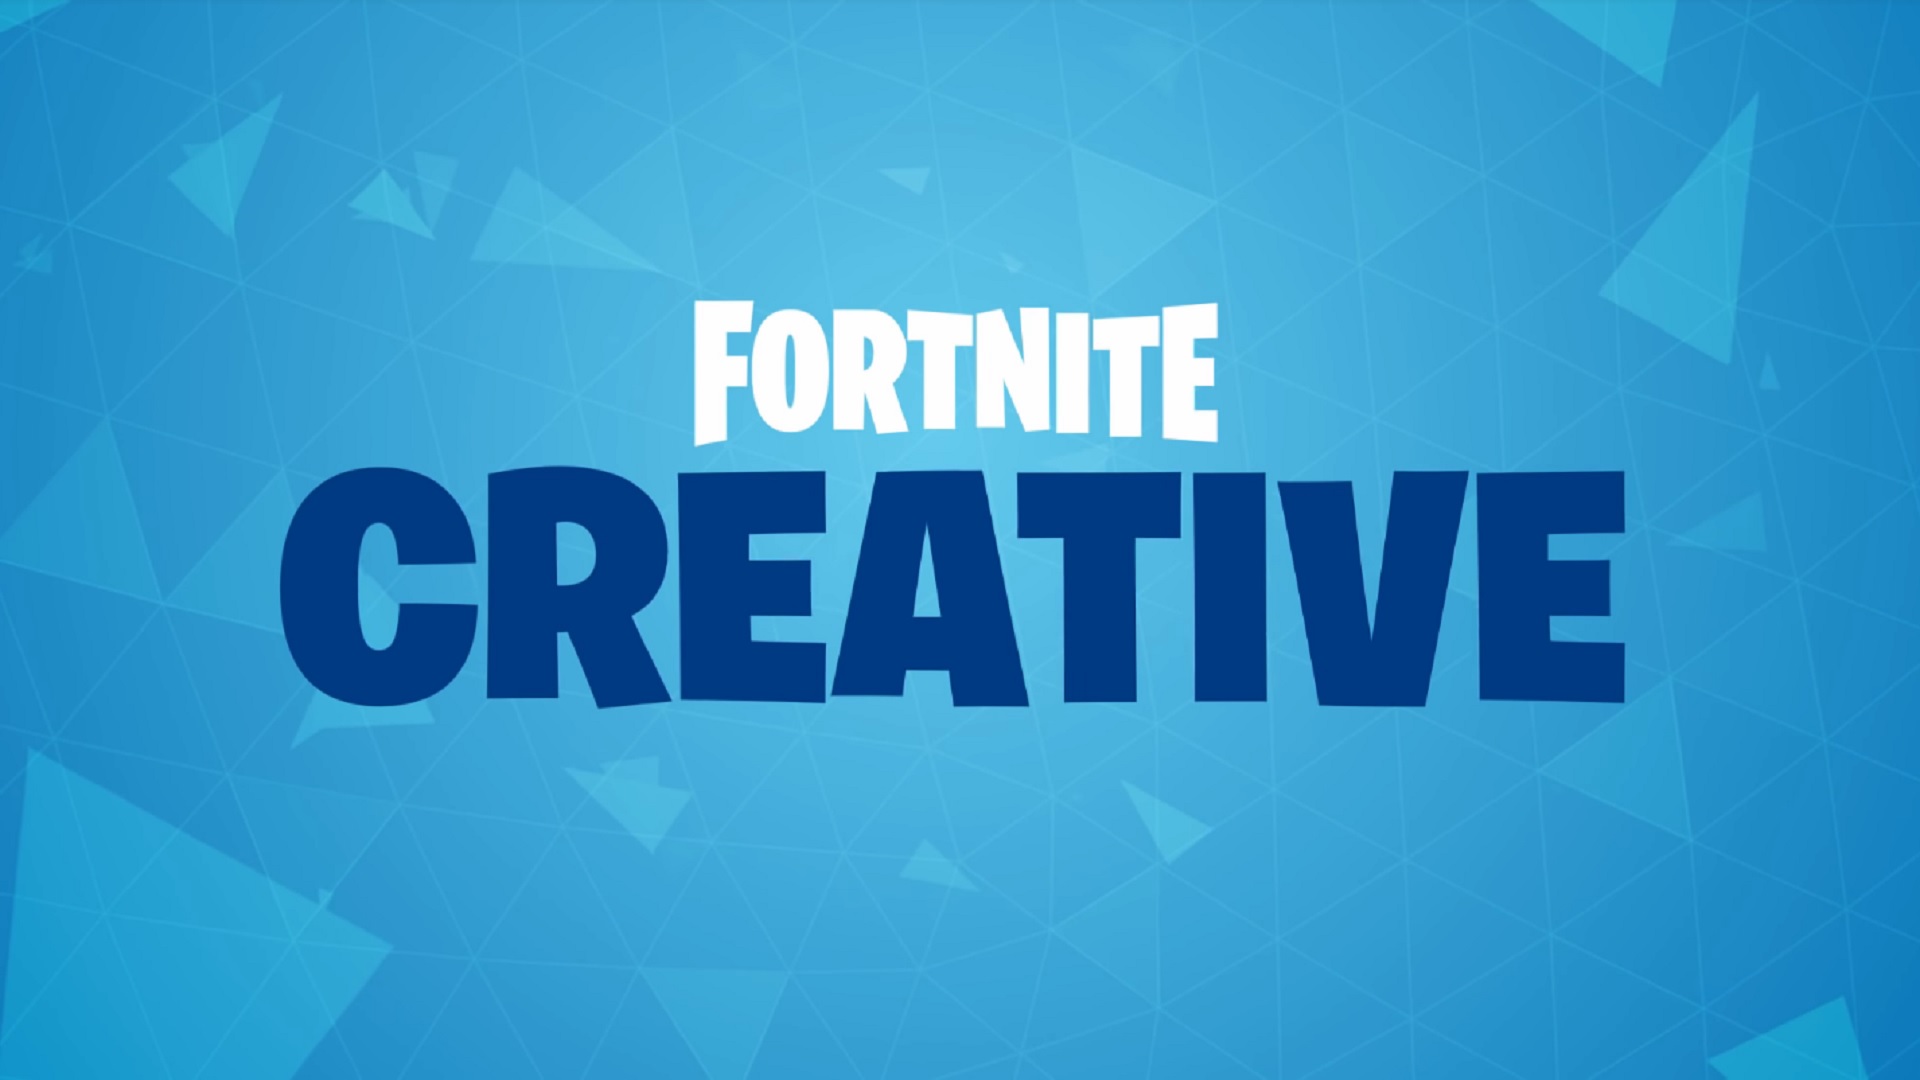 Fortnite Creative lets you make your own game modes on a ... - 1920 x 1080 jpeg 159kB